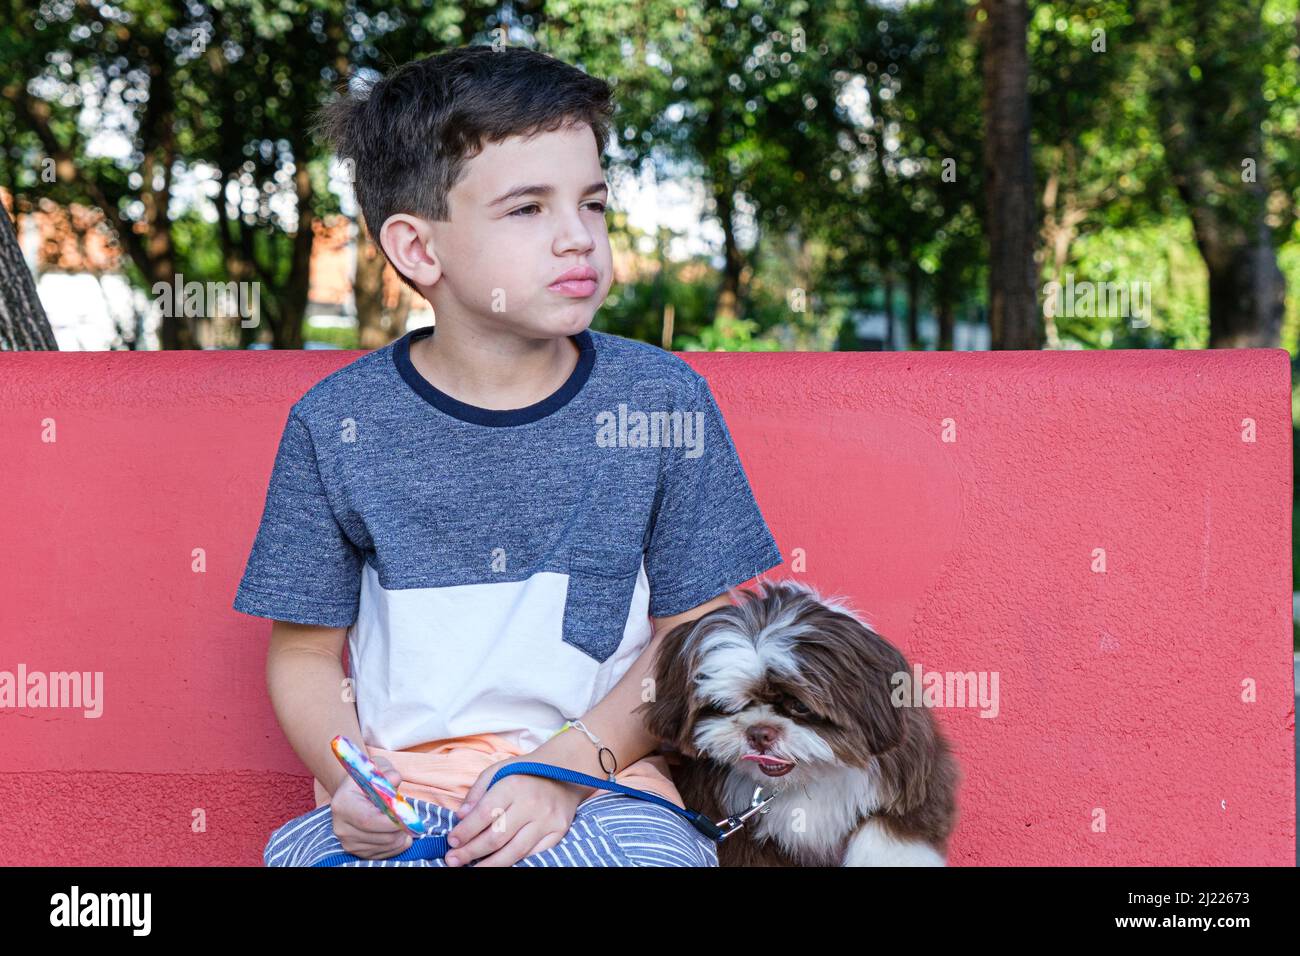 8 year old boy sitting on a red bench next to his pet, holding a lollipop and looking to the side. Stock Photo